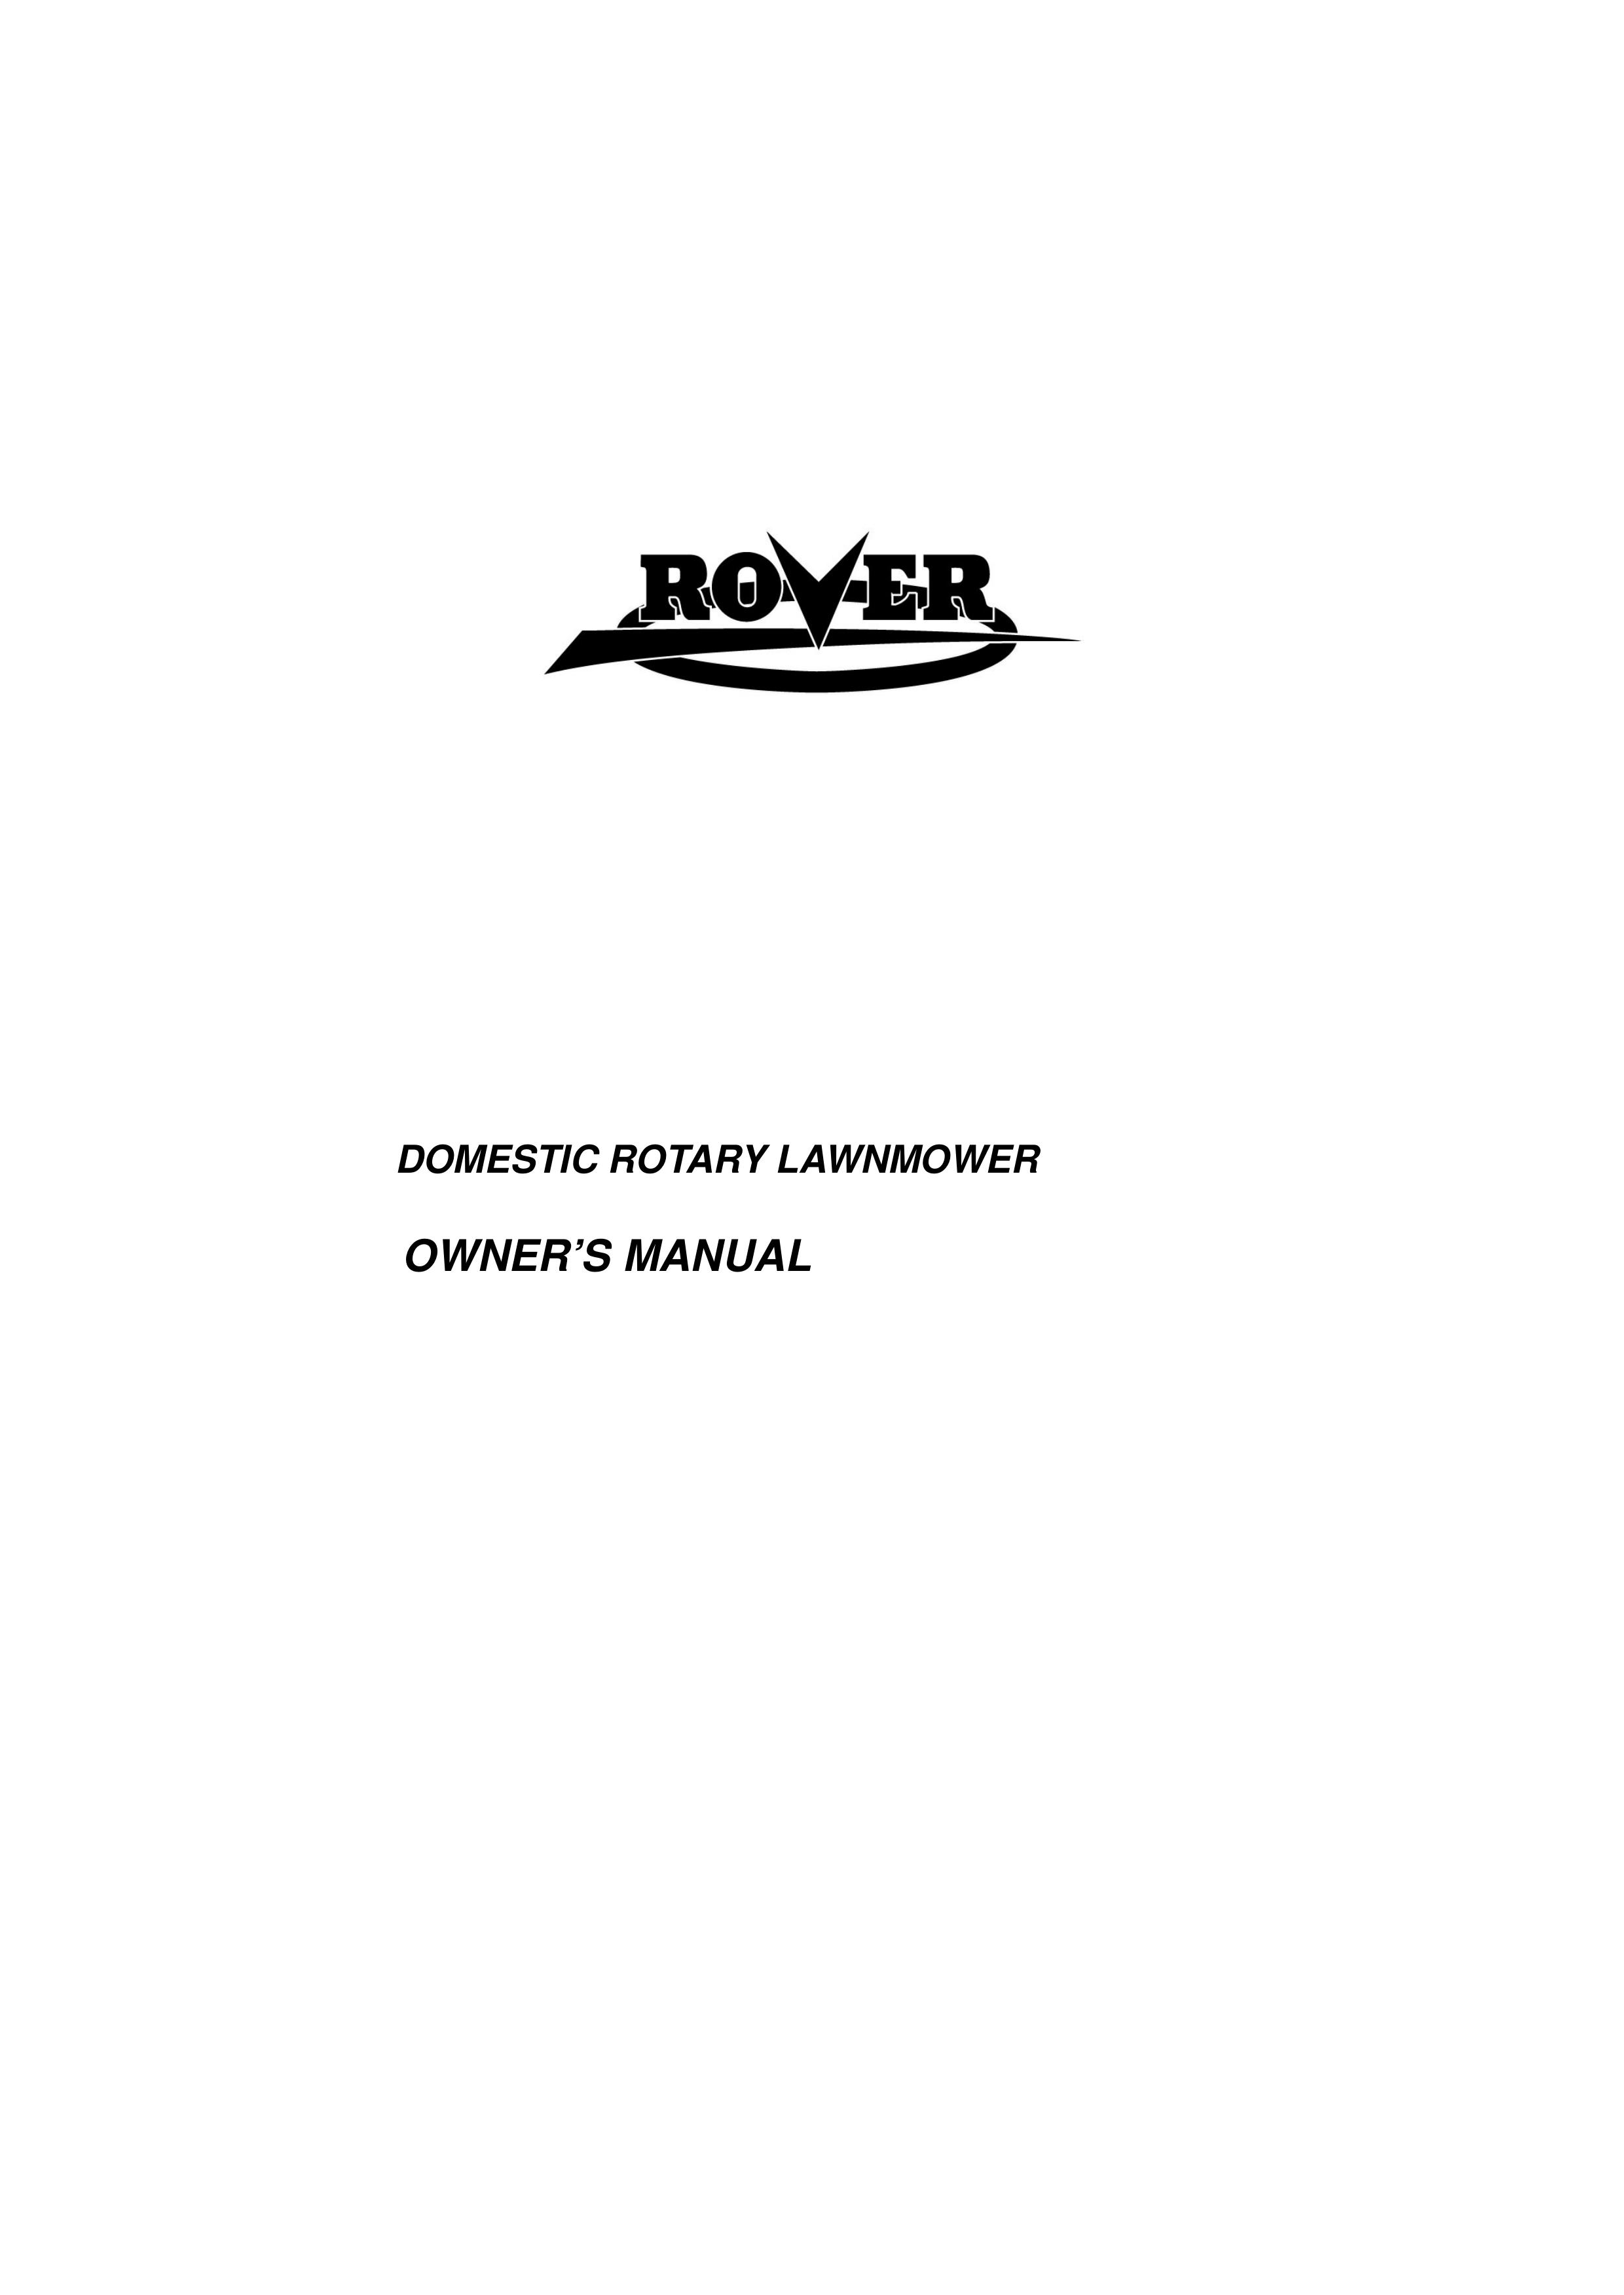 Rover Domestic Rotary Lawnmower Lawn Mower User Manual